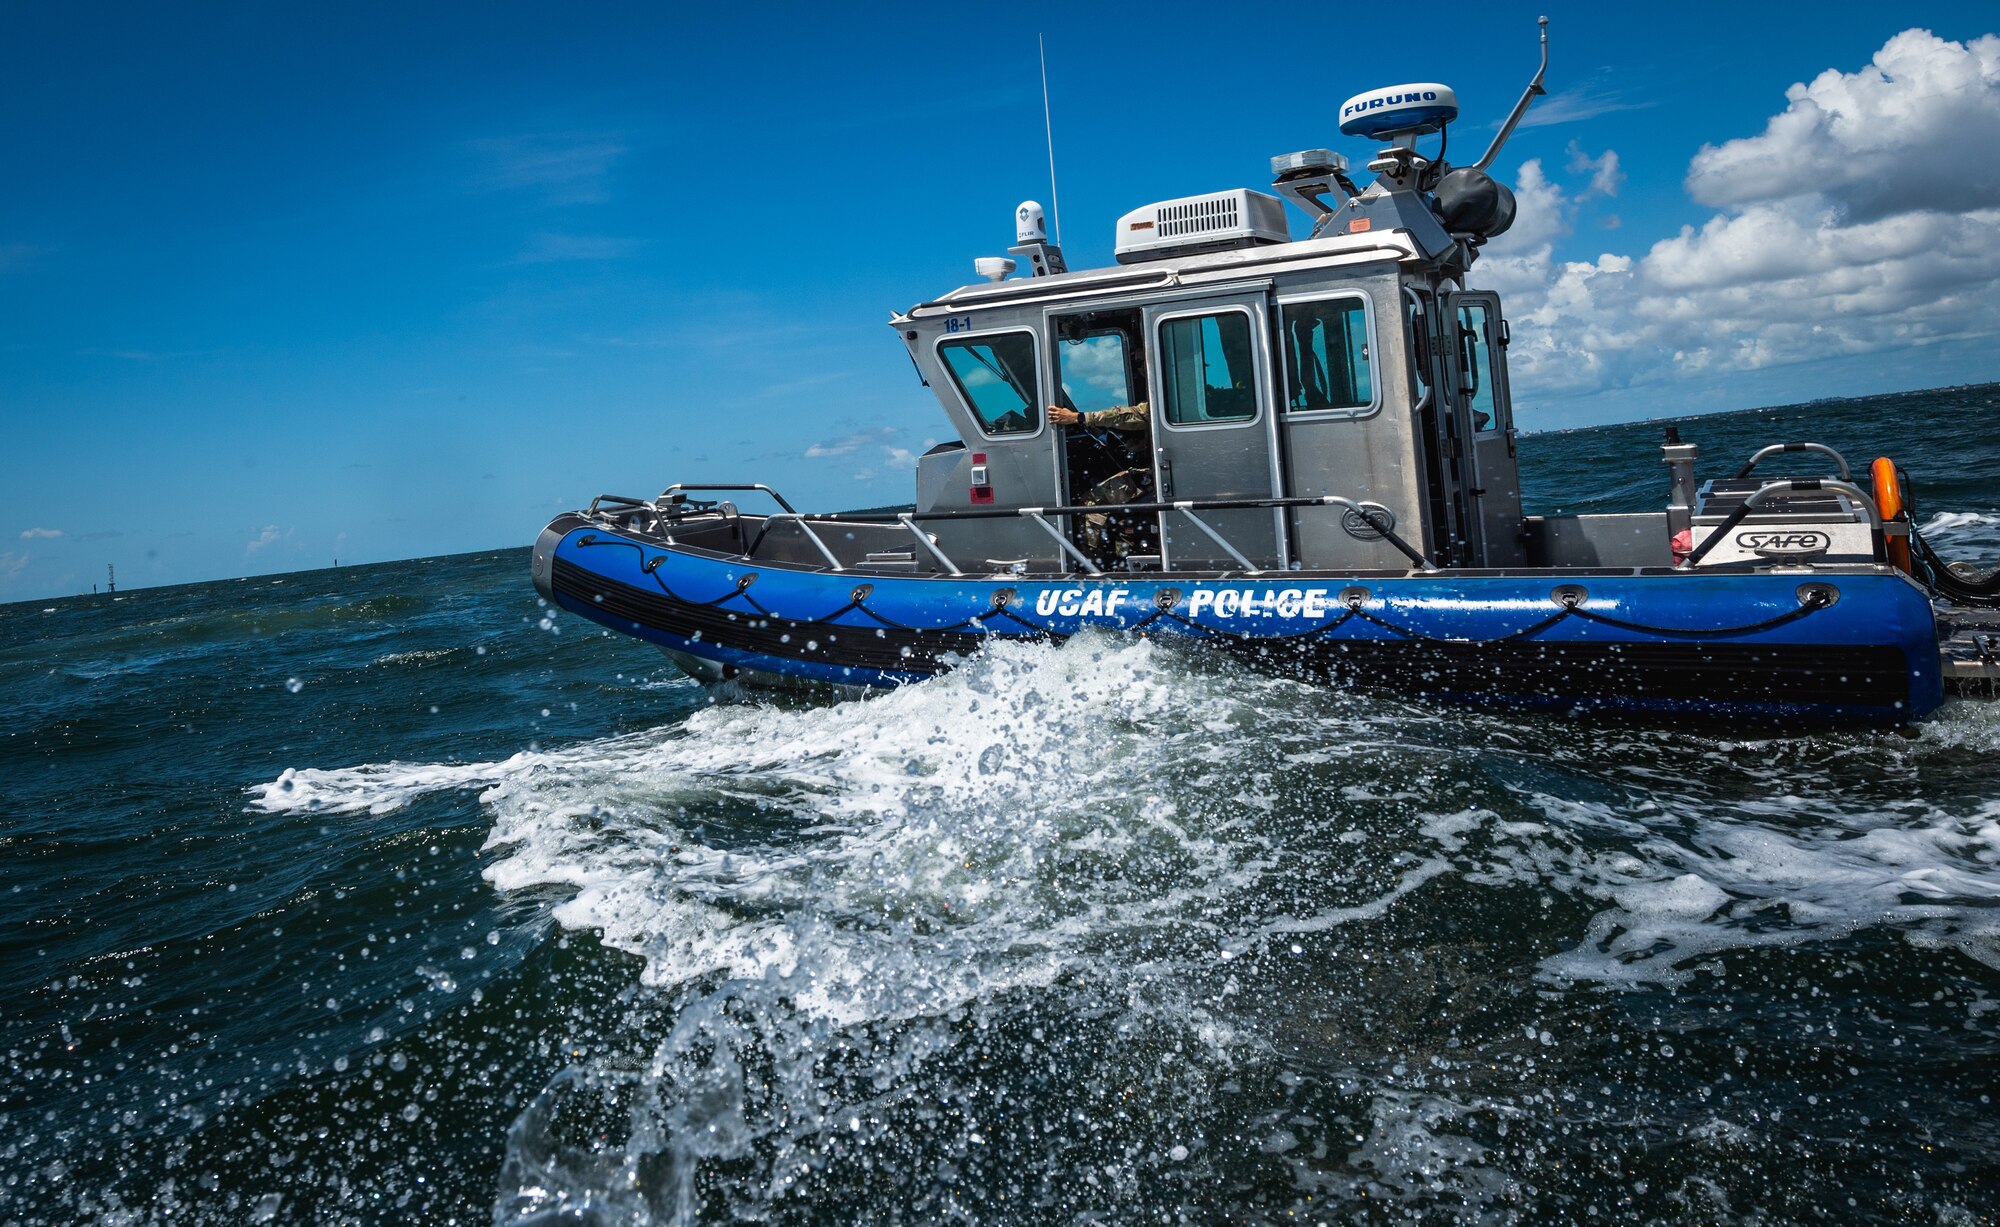 U.S. marine patrolmen assigned to the 6th Security Forces Squadron operate a vessel during a routine patrol in Tampa Bay, Florida, July 10, 2022. On June 12, marine patrolmen Airman 1st Class Samari Rivera-Rodriguez, Kade Jones, and Sabin Venable, along with Staff Sgt. Au rescued eight victims who were stranded on top of a capsized vessel in Tampa Bay while on patrol. The 6th SFS Marine Patrol unit is the only fully operational, 24/7 unit in the Air Force, and is responsible for protecting one of the largest coastal restricted areas in the Department of Defense. (U.S. Air Force photo by Staff Sgt. Alexander Cook)